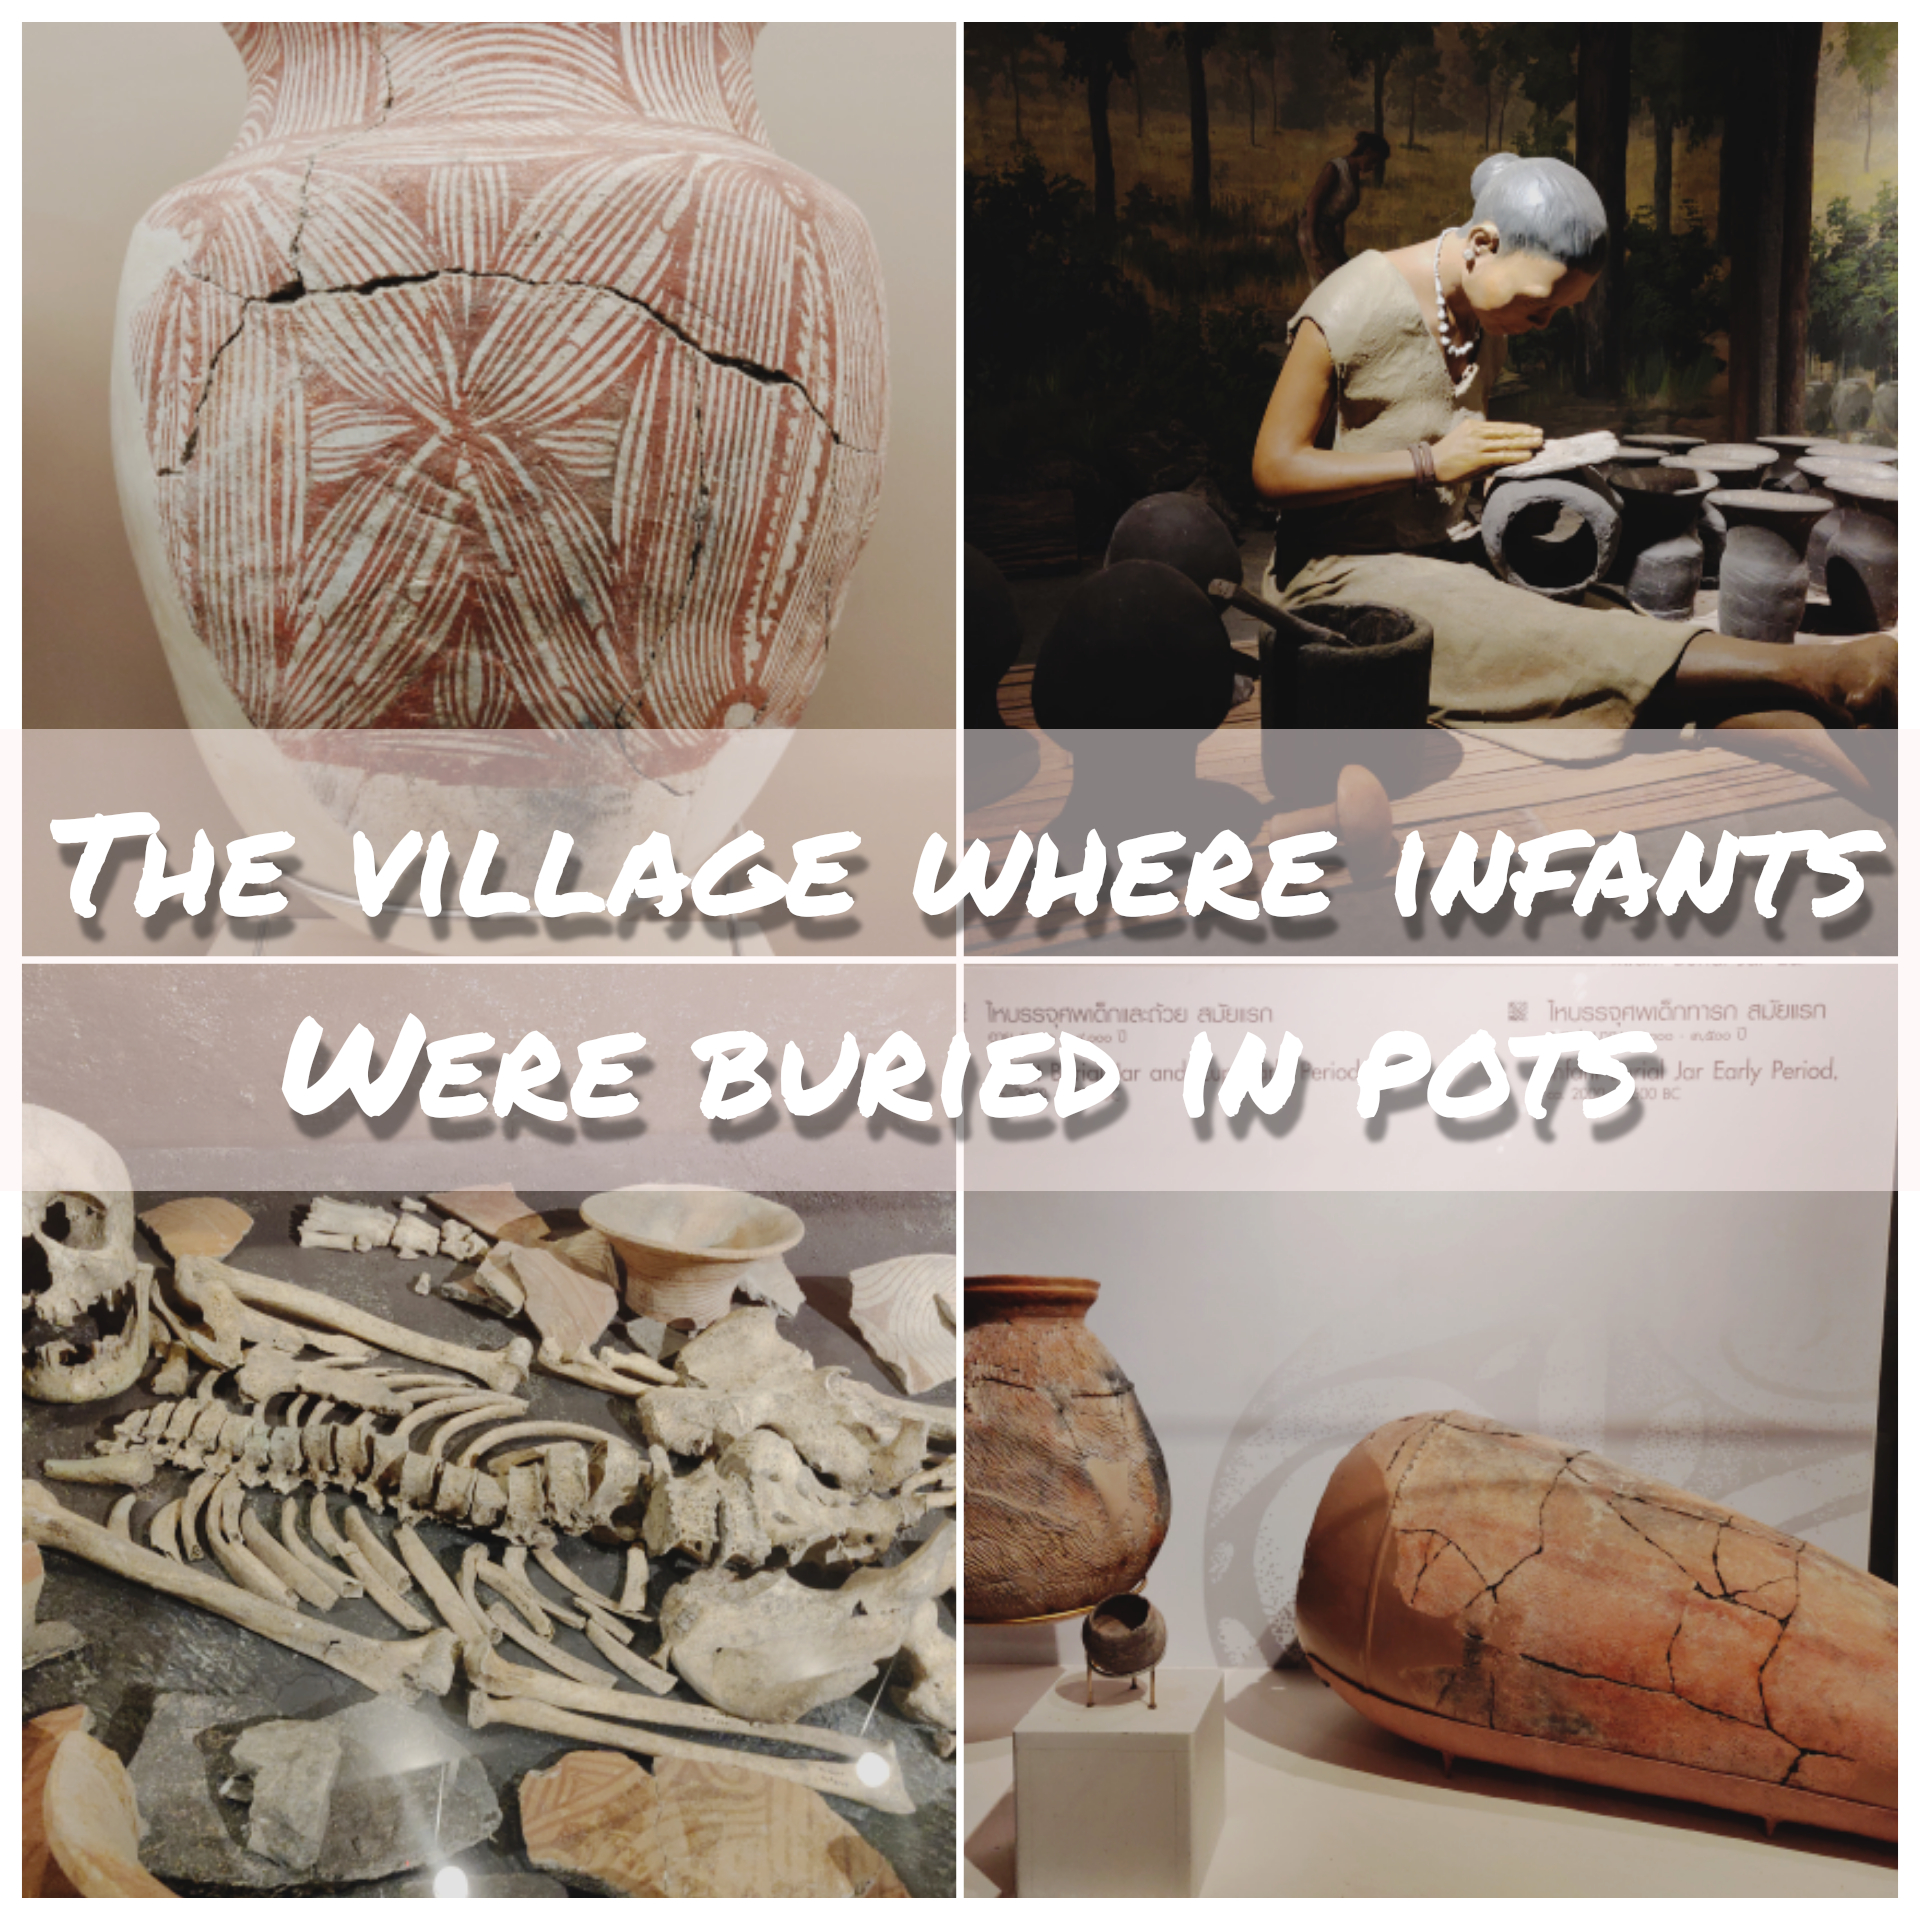 The Thai village where infants were buried in stunning red-painted clay pots